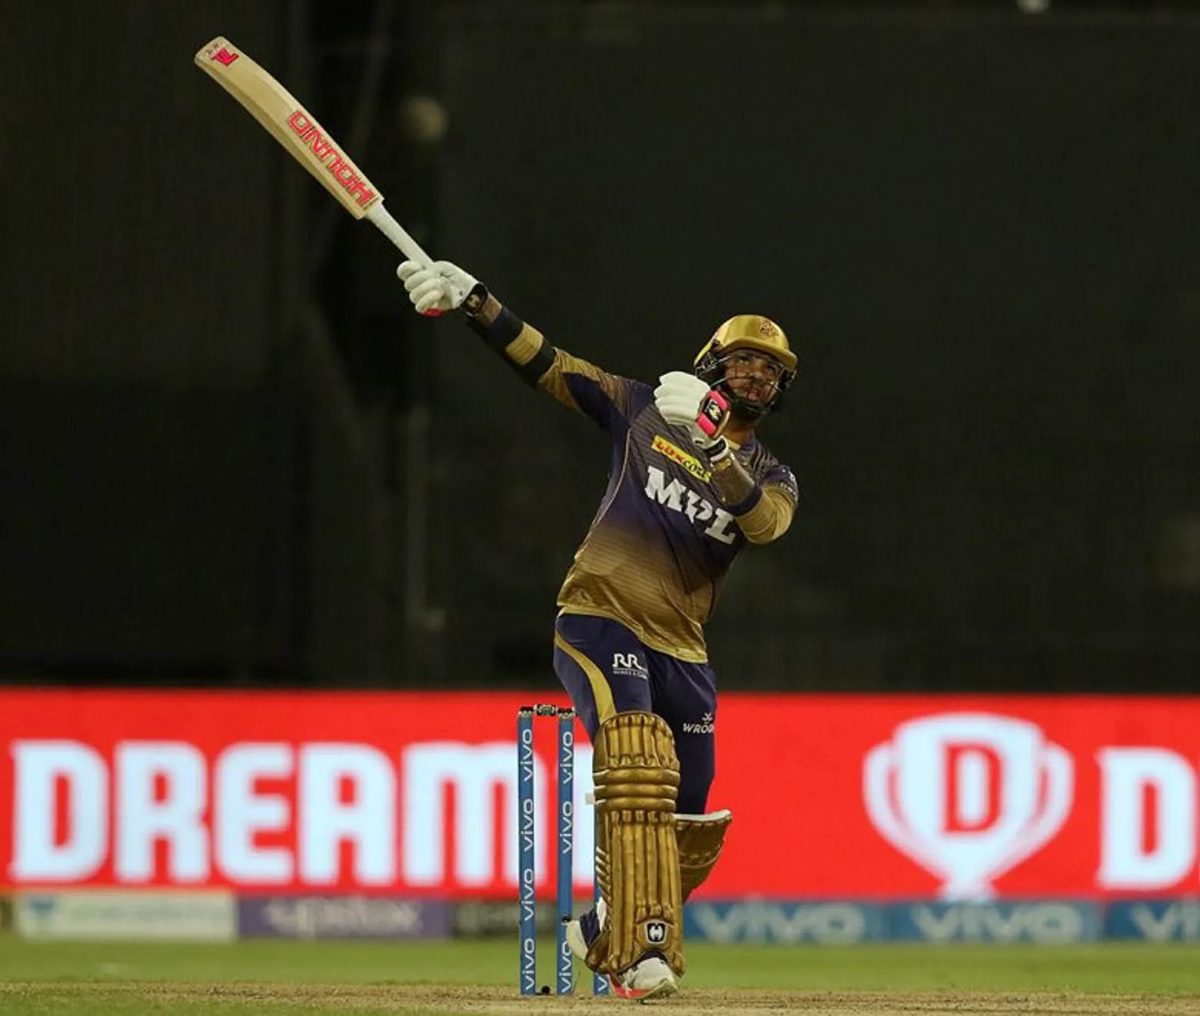 Sunil Narine of Kolkata Knight Riders plays a shot during the eliminator match of the Vivo Indian Premier League against the Royal Challengers Bangalore at the Sharjah Cricket Stadium, Sharjah in the United Arab Emirates yesterday. Photo by Rahul Gulati / Sportzpics for IPL